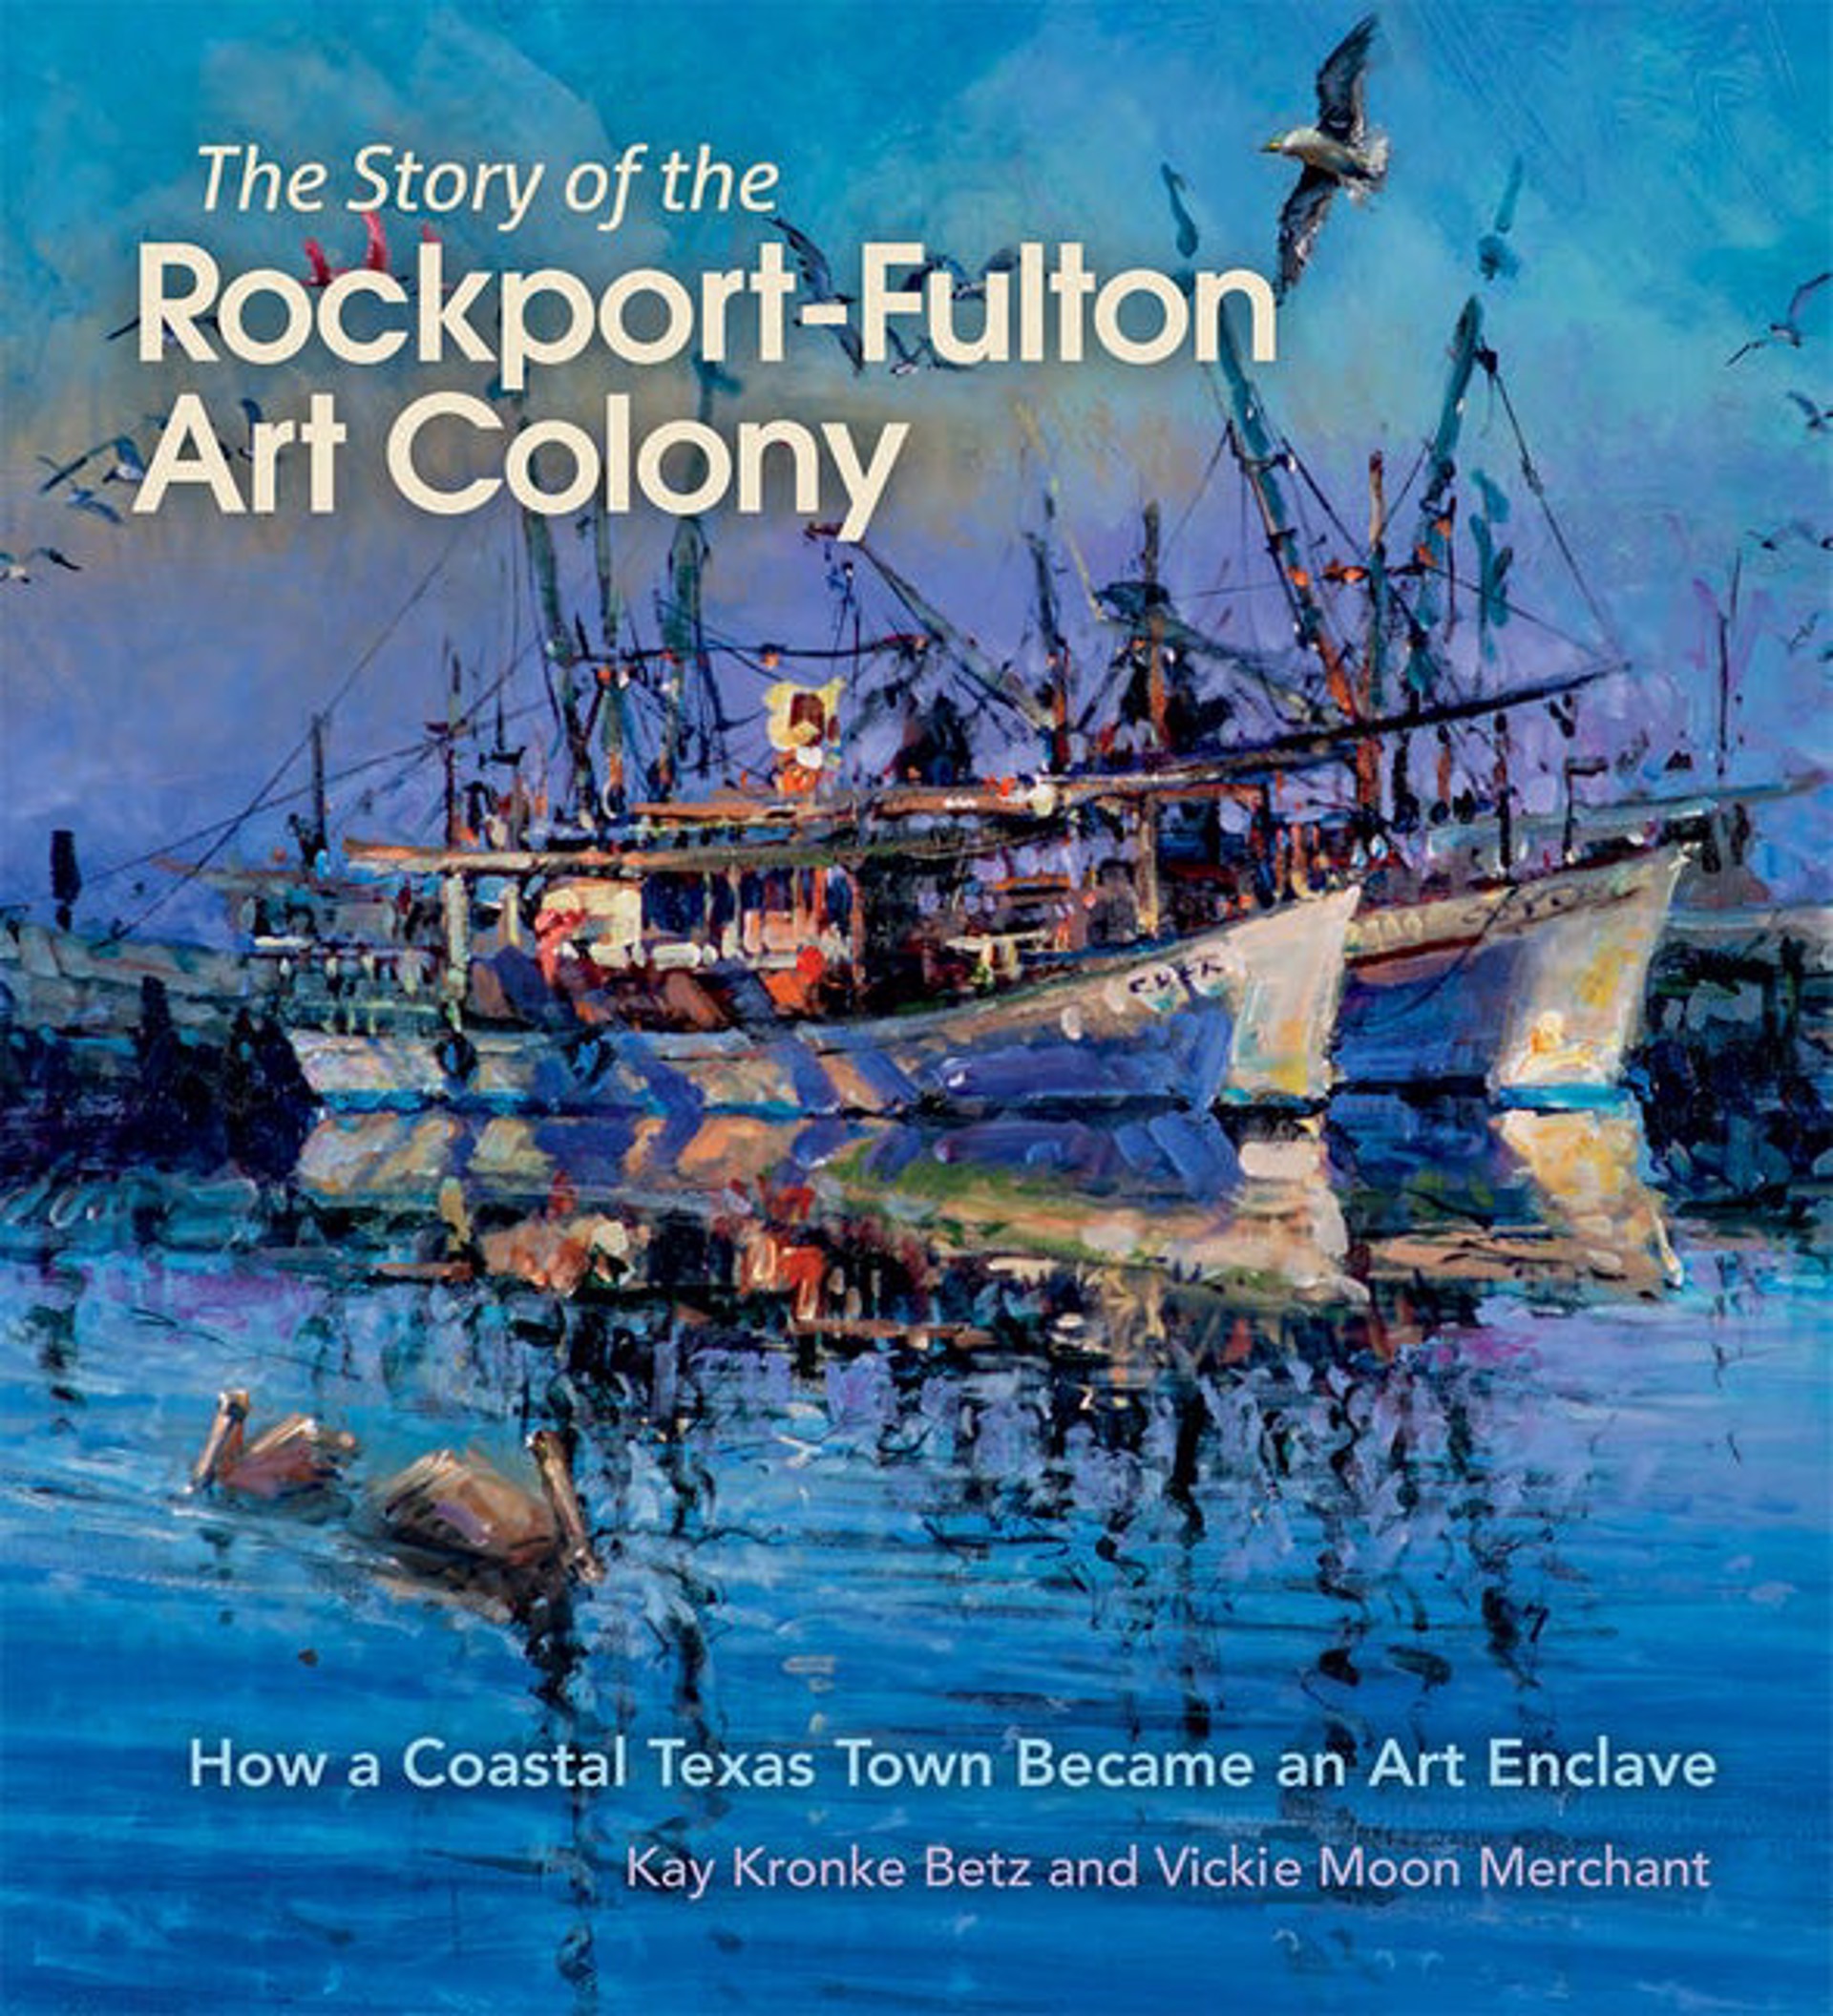 The Story of the Rockport-Fulton Art Colony: How a Coastal Texas Town Became an Art Enclave by Publications